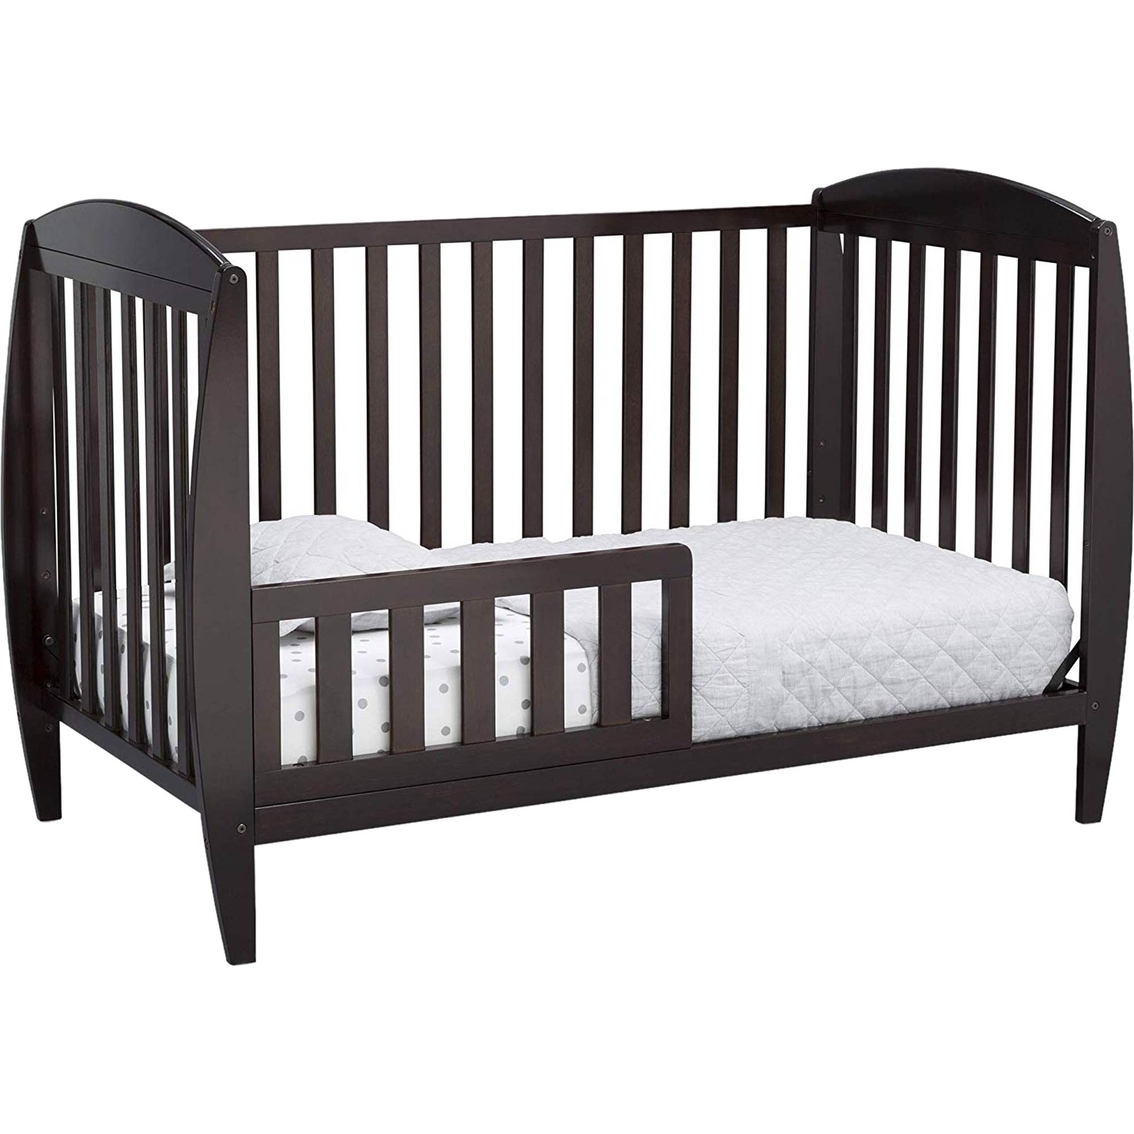 Delta Children Taylor 4 in 1 Convertible Crib - Image 3 of 6